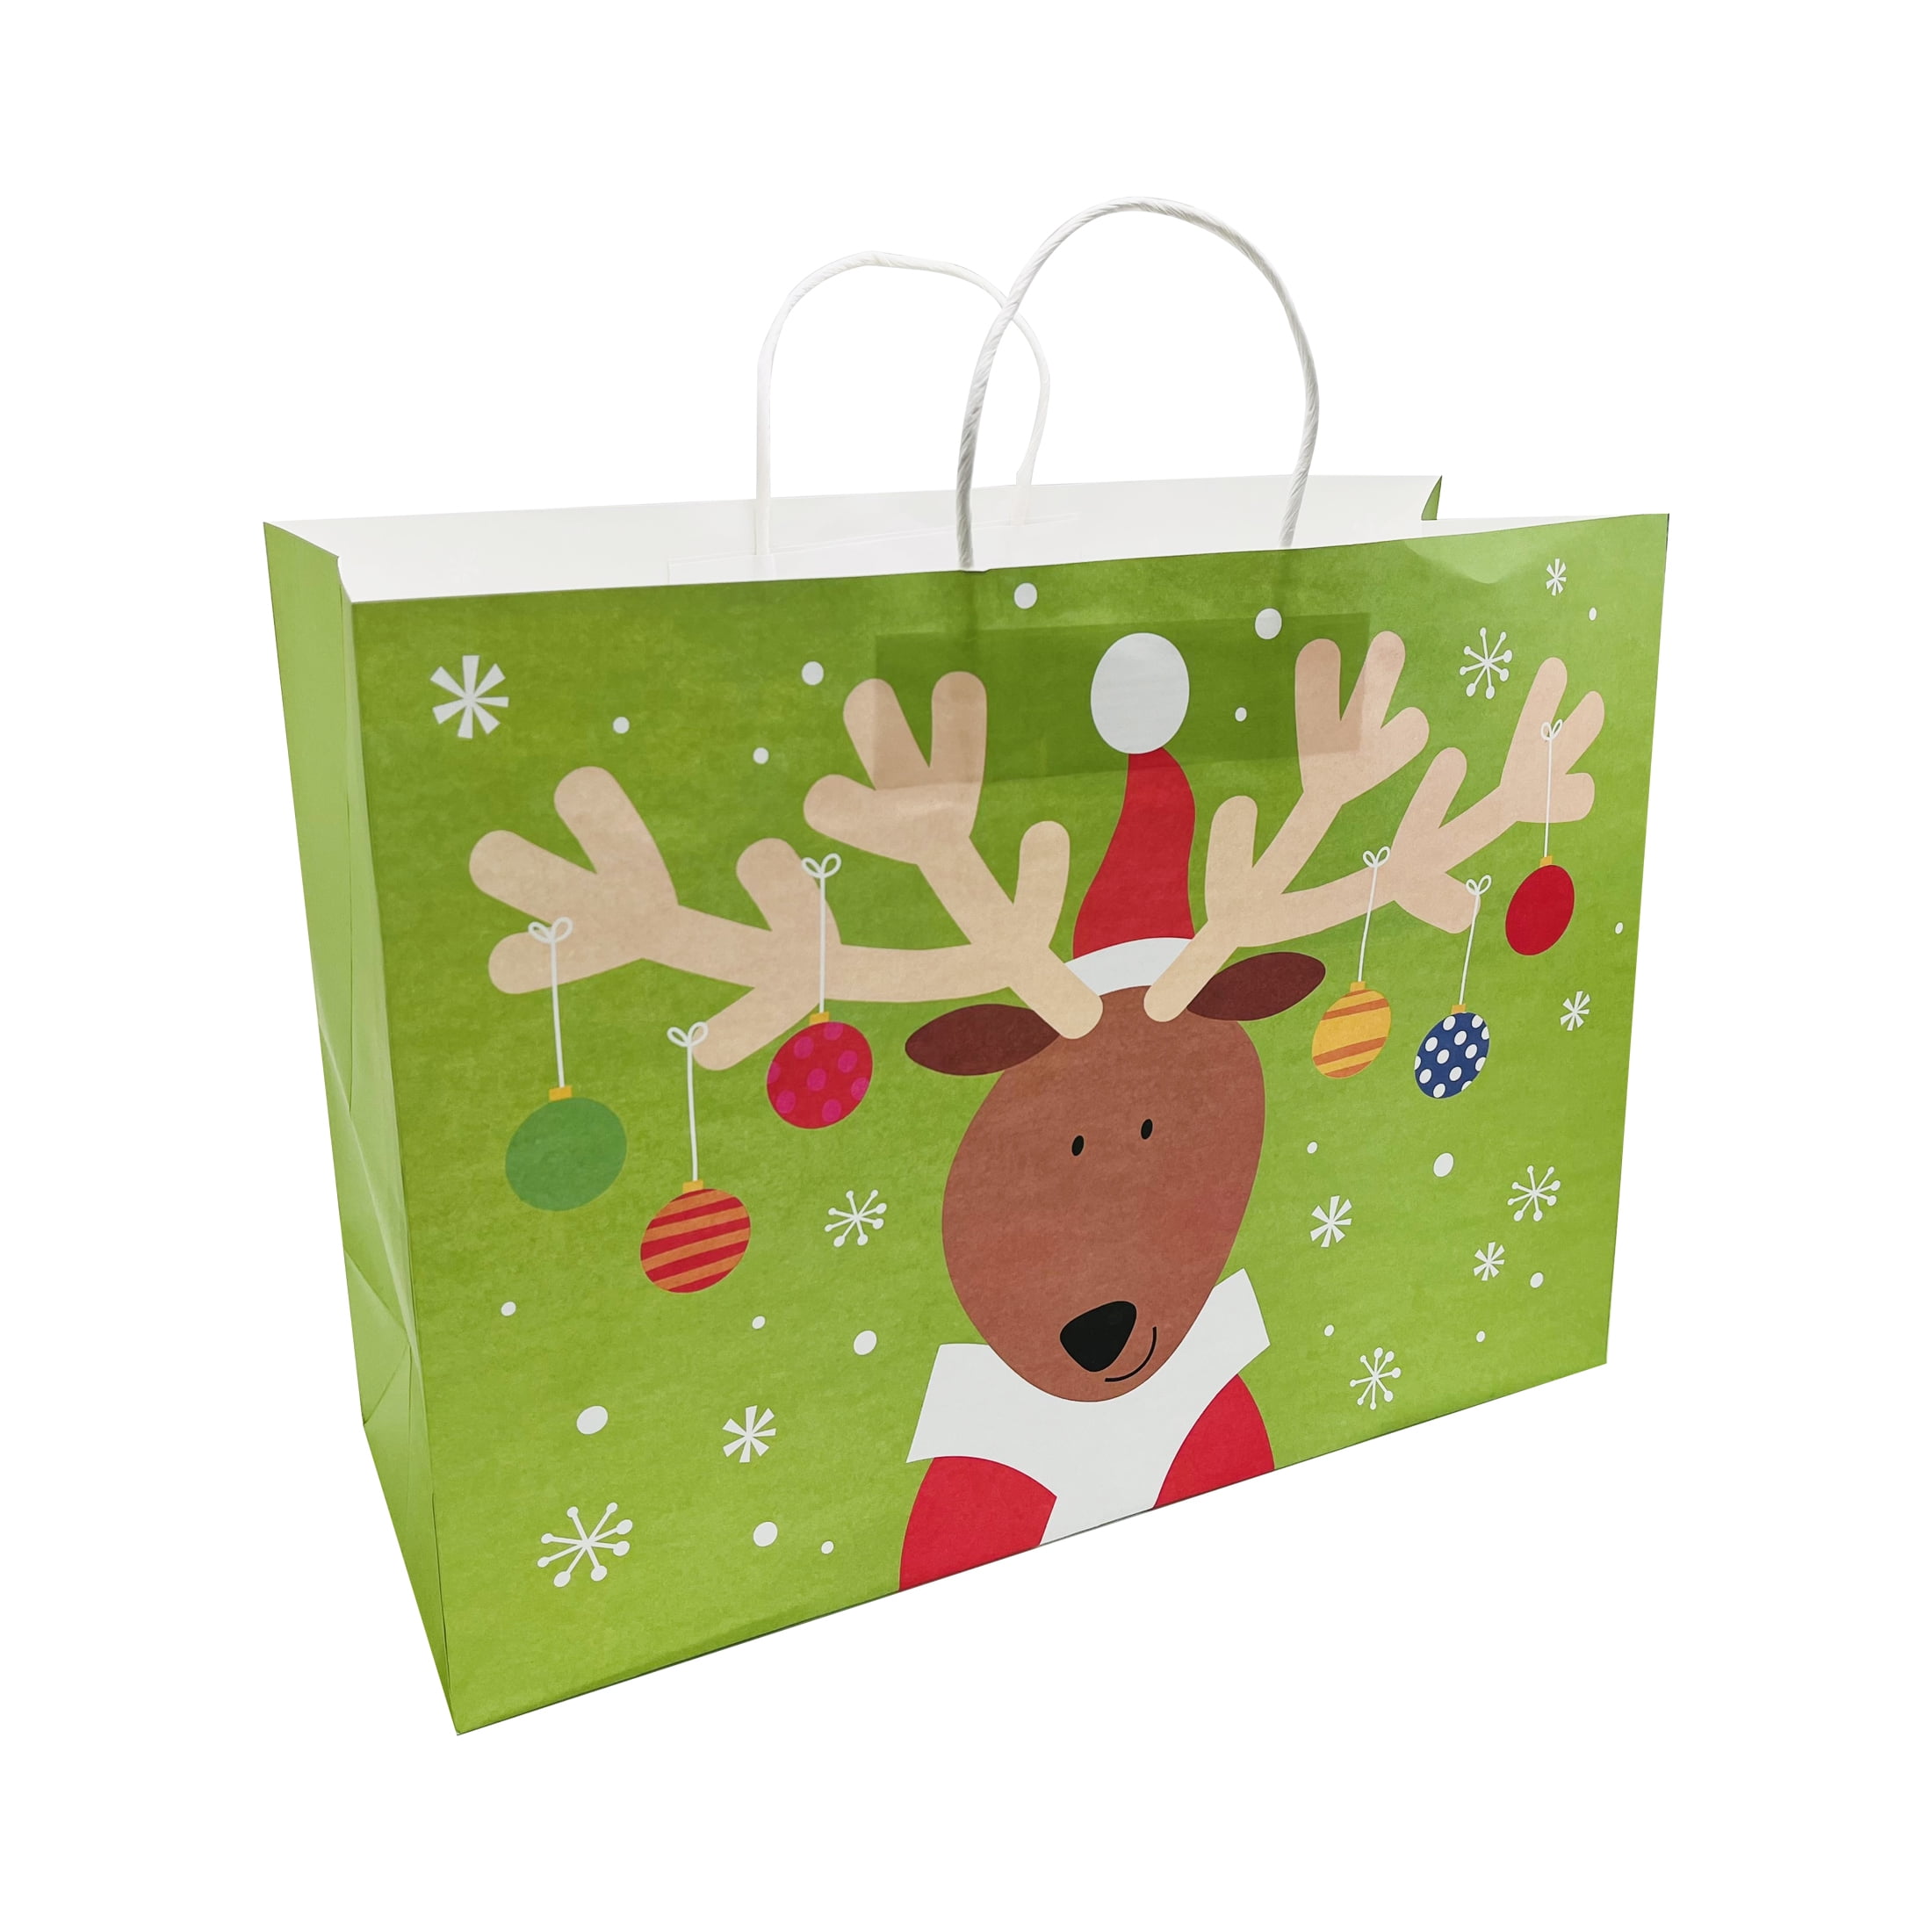 Holiday Time Christmas Gift Paper Bag, Green Reindeer, XLarge, 16x6x12in